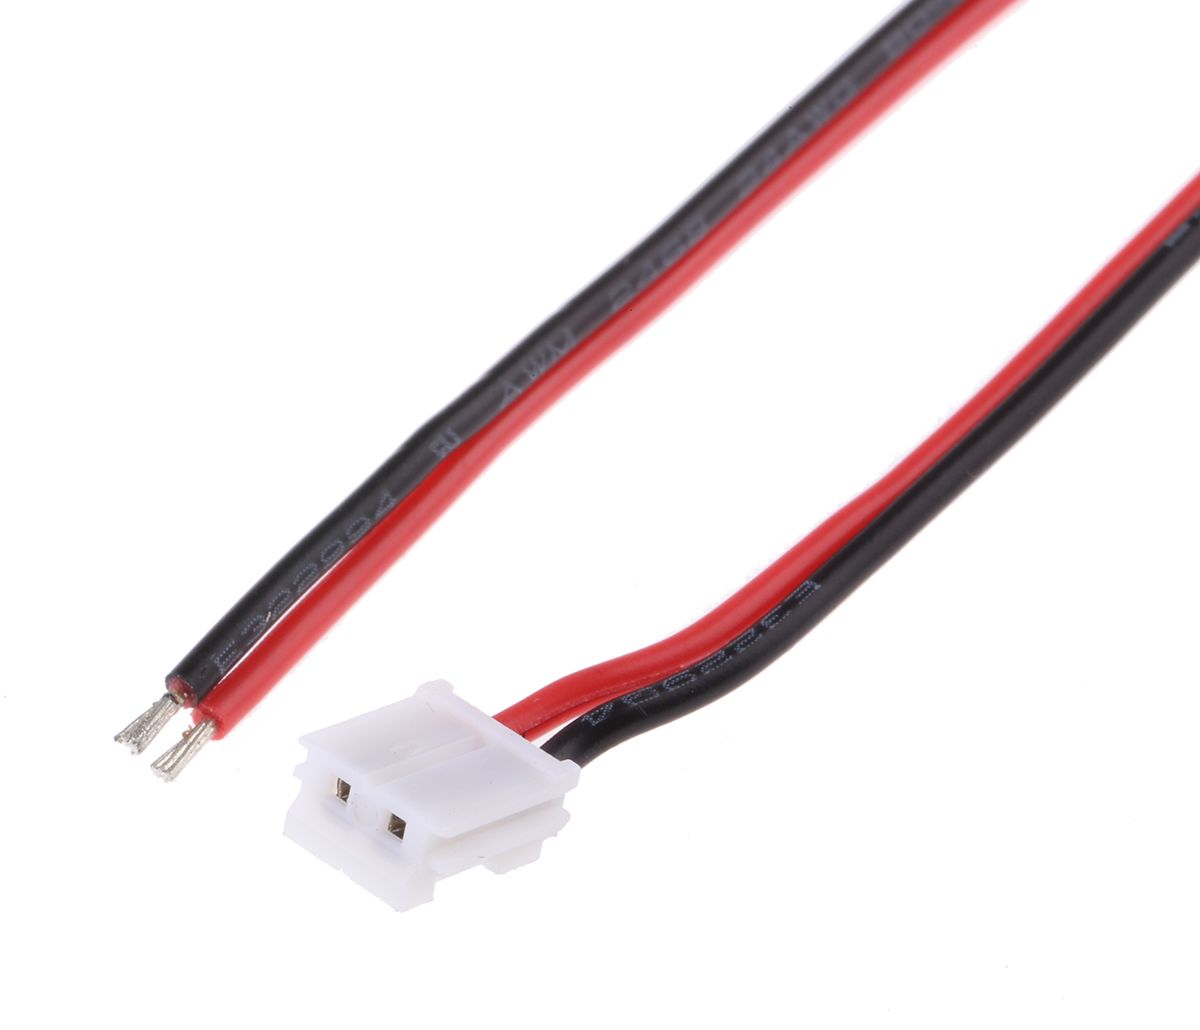 JKL Components ZCH-200-I Power Supply LED Cable for ZRS-8480 LED Light Bar, 200.7mm